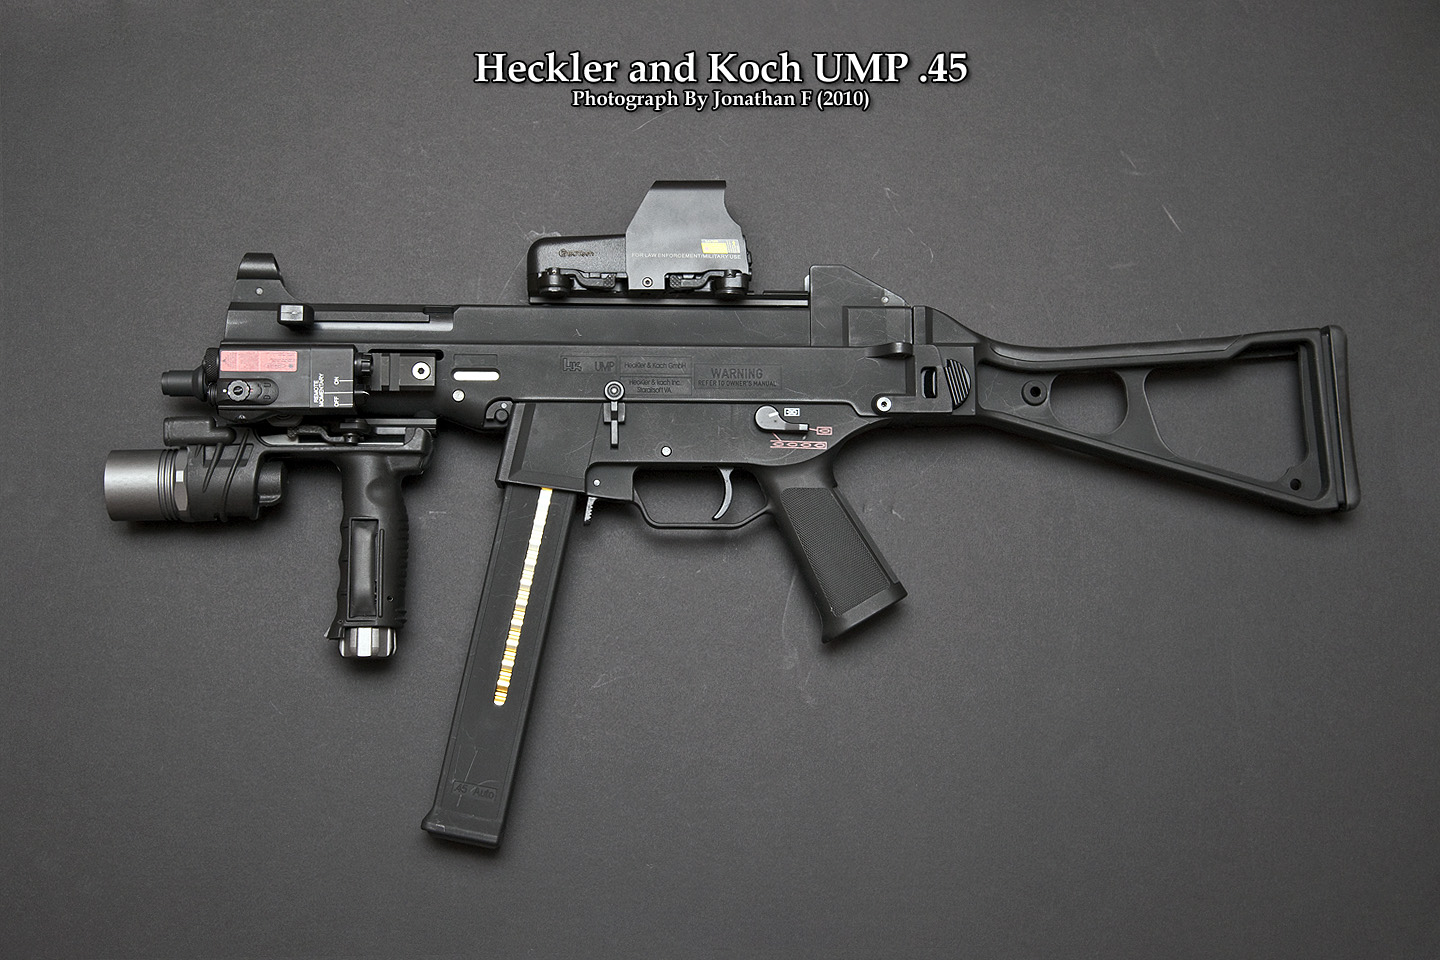 Time for a set of pictures of an under-appreciated HK gun.. the Ares UMP .4...